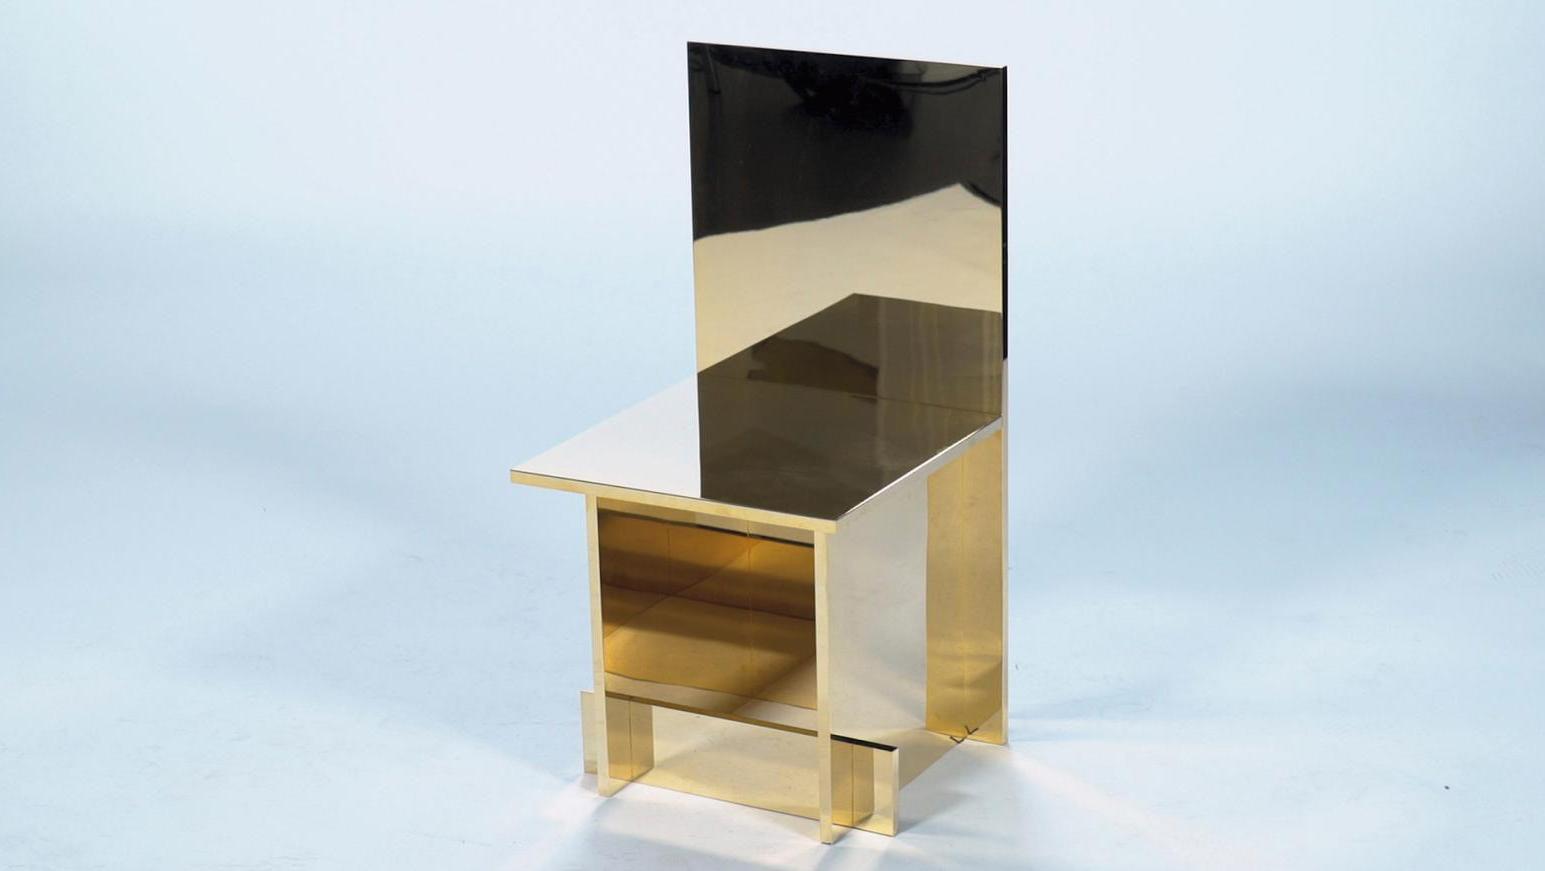 Céline, chair 01 "Dorée" in gold-plated stainless steel, never sold, 80 x 40 x 47... Fashion for Sidaction